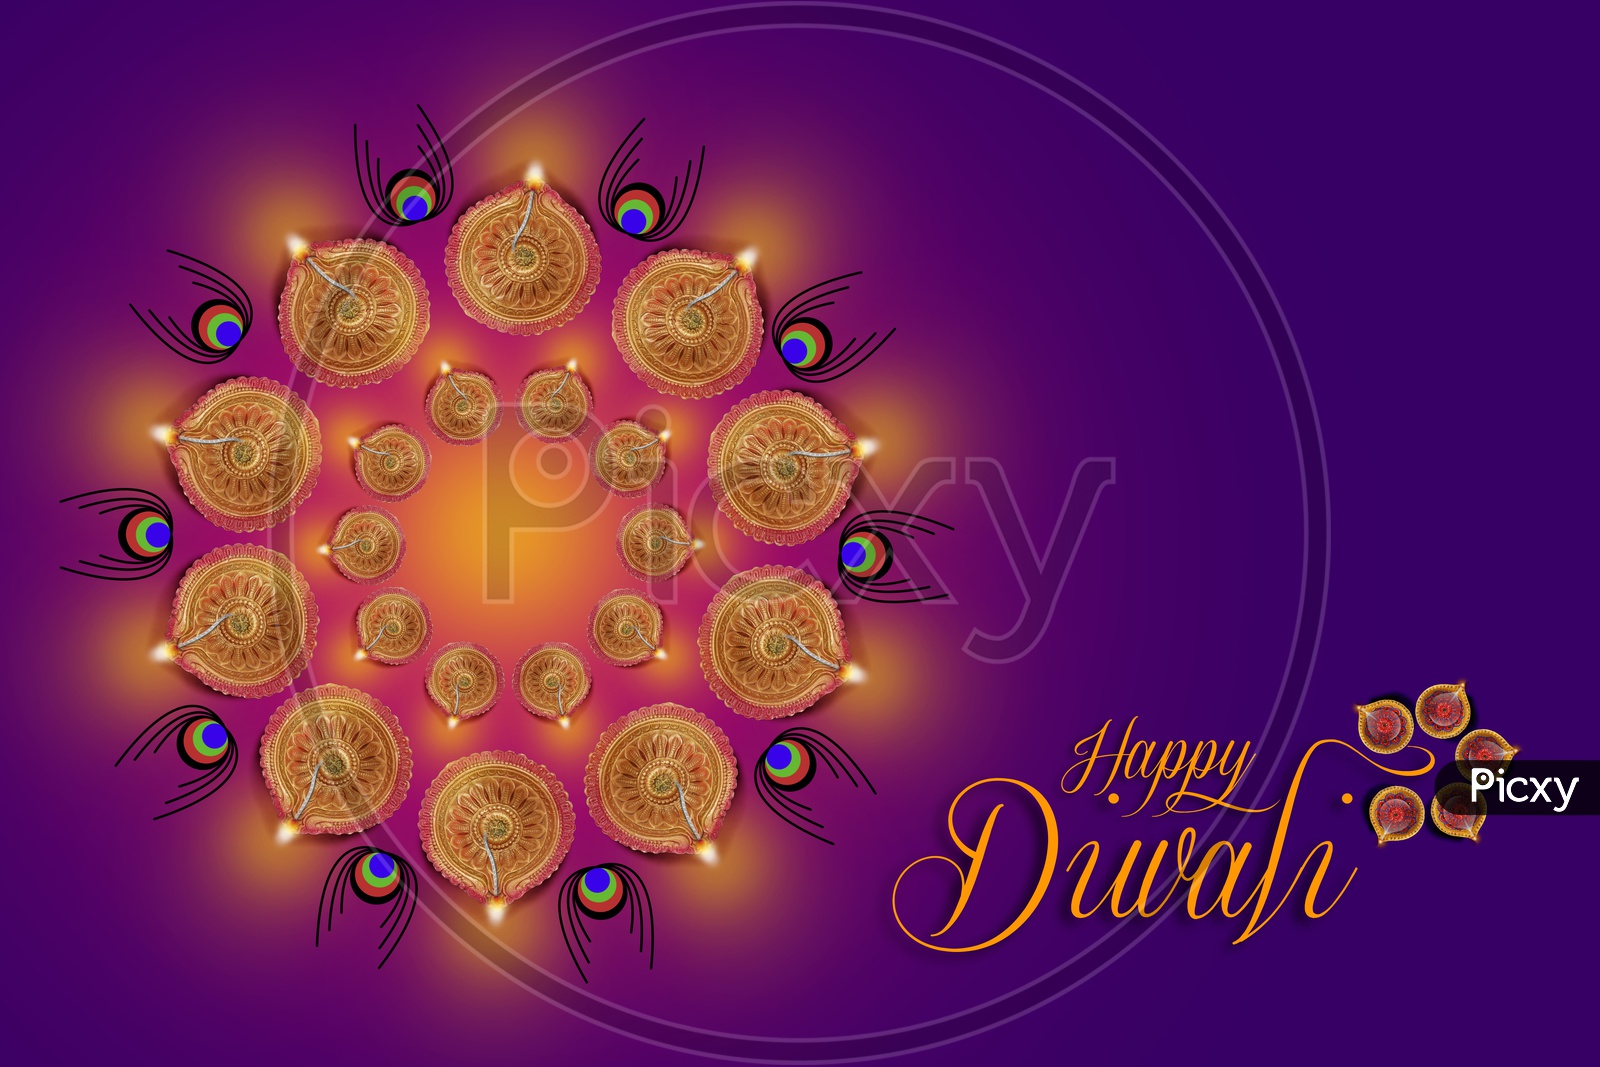 A Beautiful Greeting  template of an Indian Festival Diwali